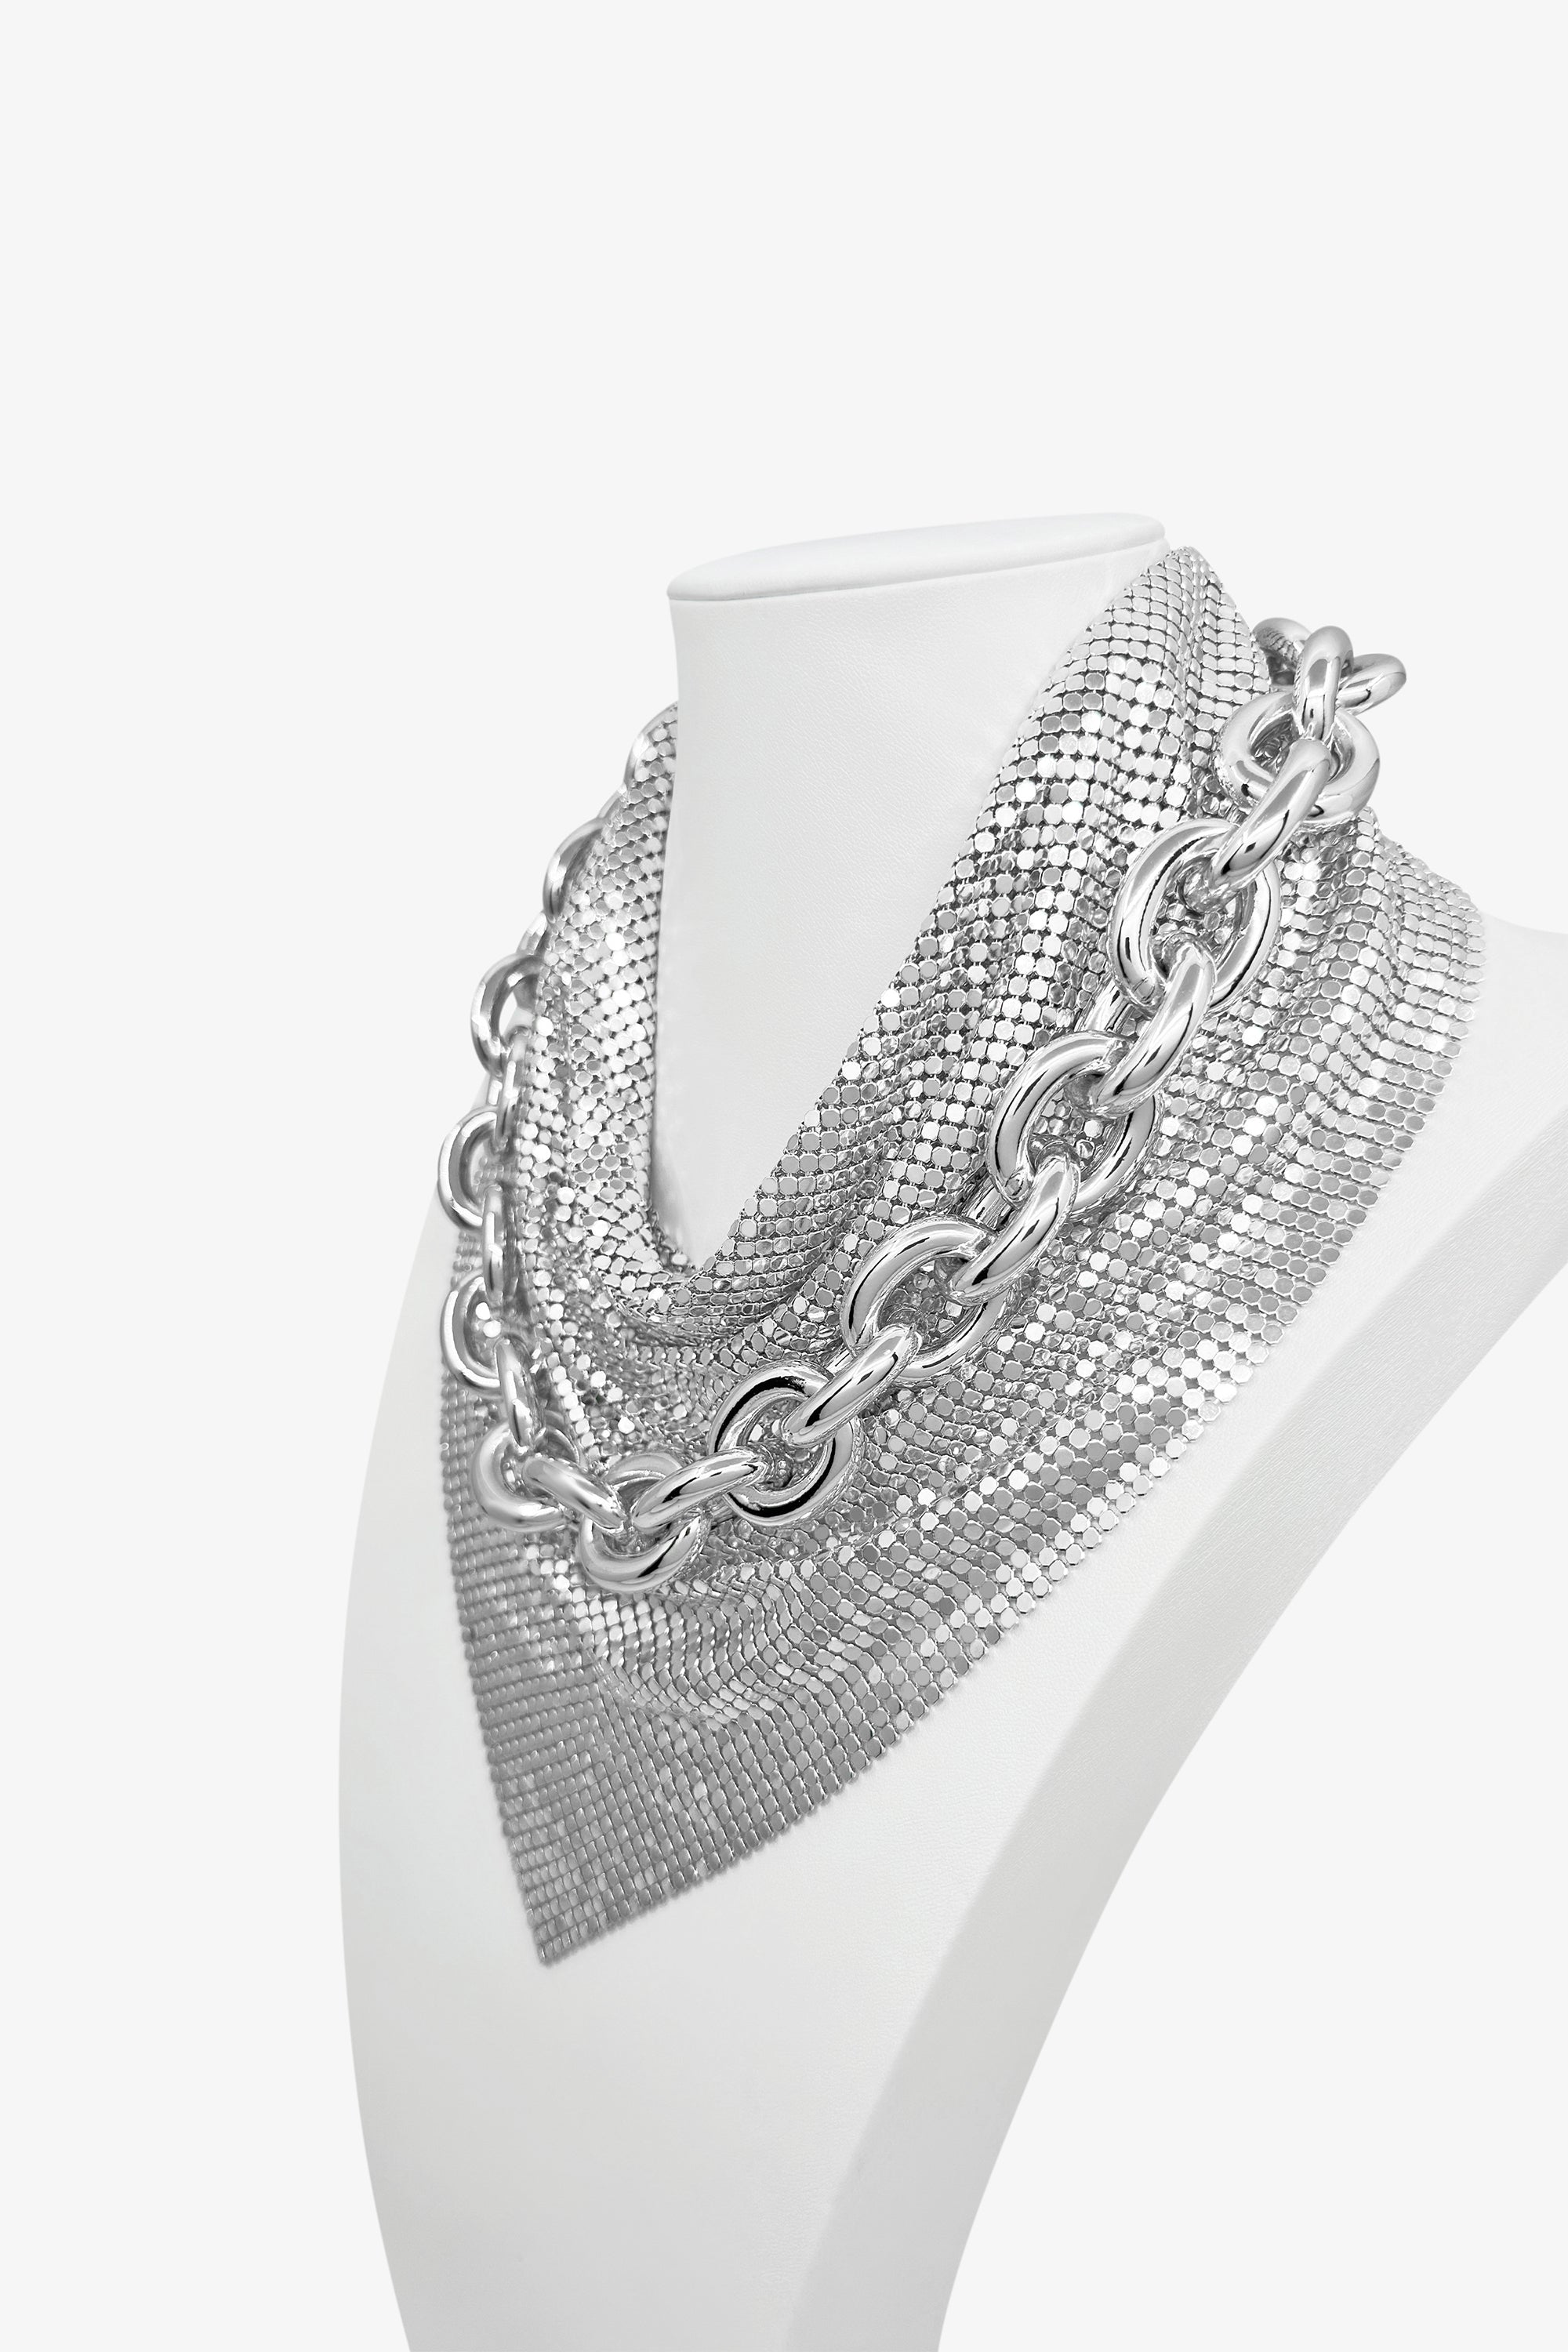 Chain Link Necklace and Bracelet Silver-Tone